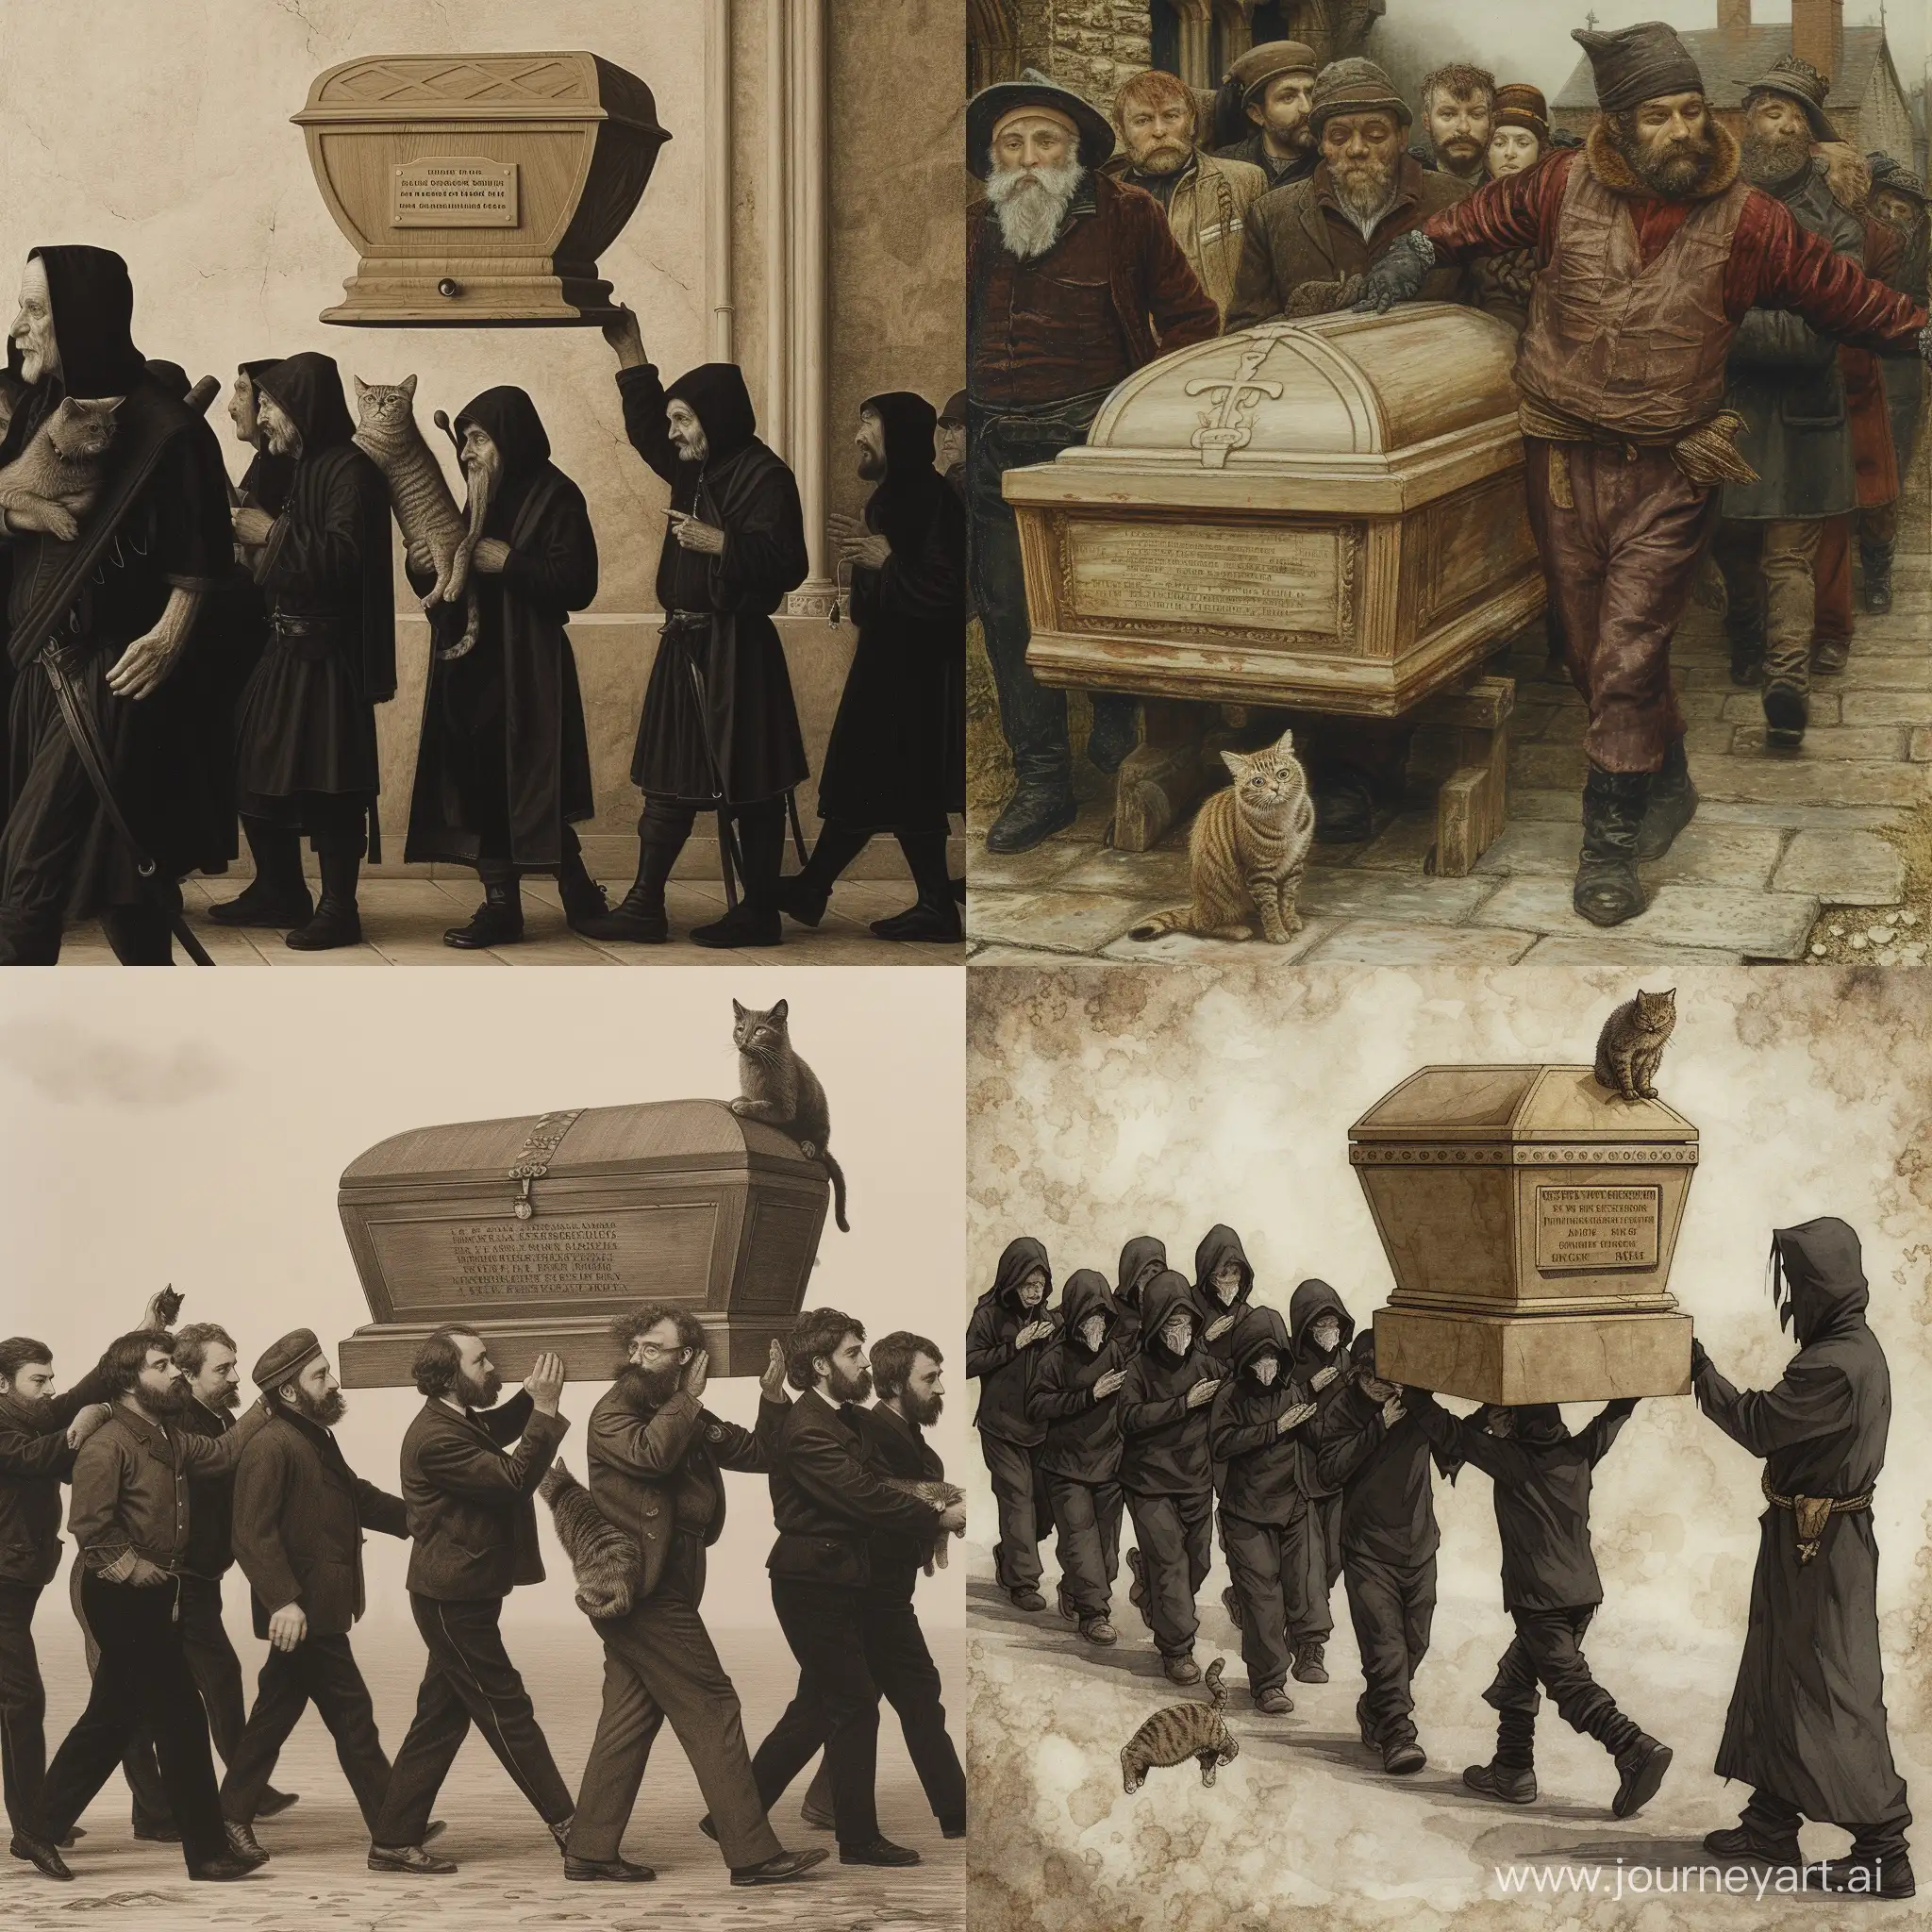 Solemn-Funeral-Procession-Without-Cat-Mourners-Carry-Sarcophagus